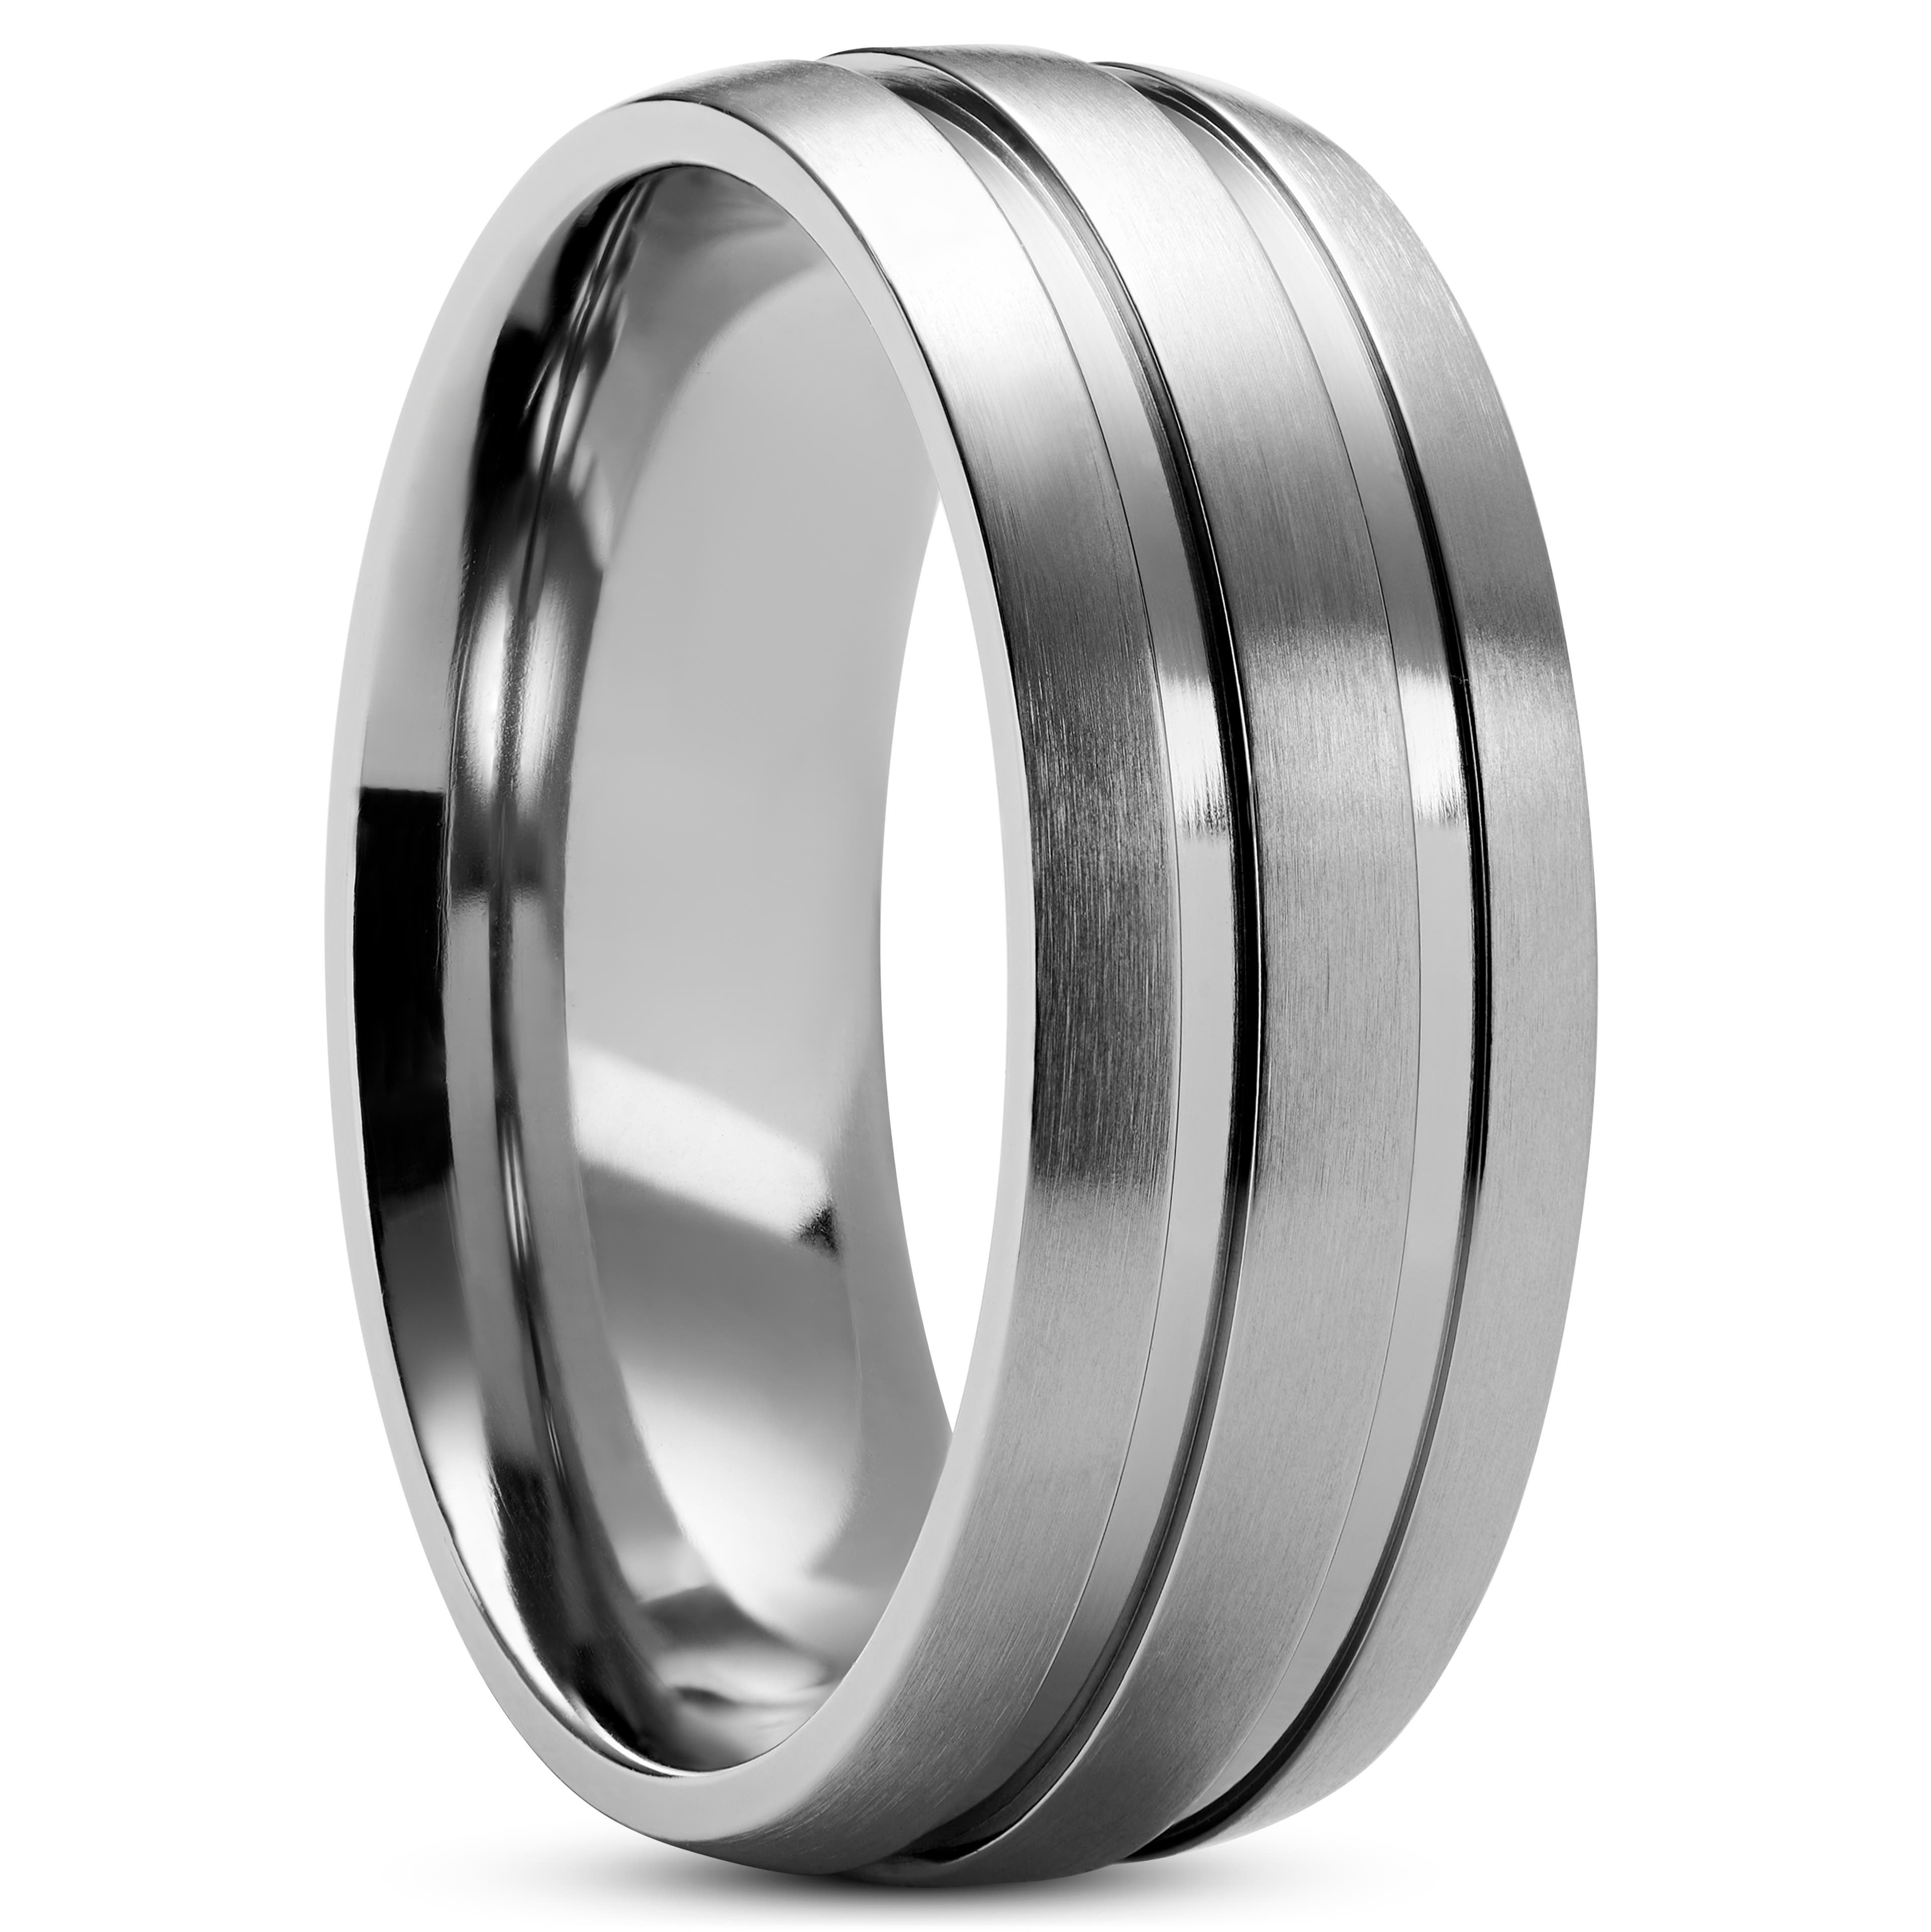 Aesop | 8 mm Silver-Tone Titanium With Line Details Ring